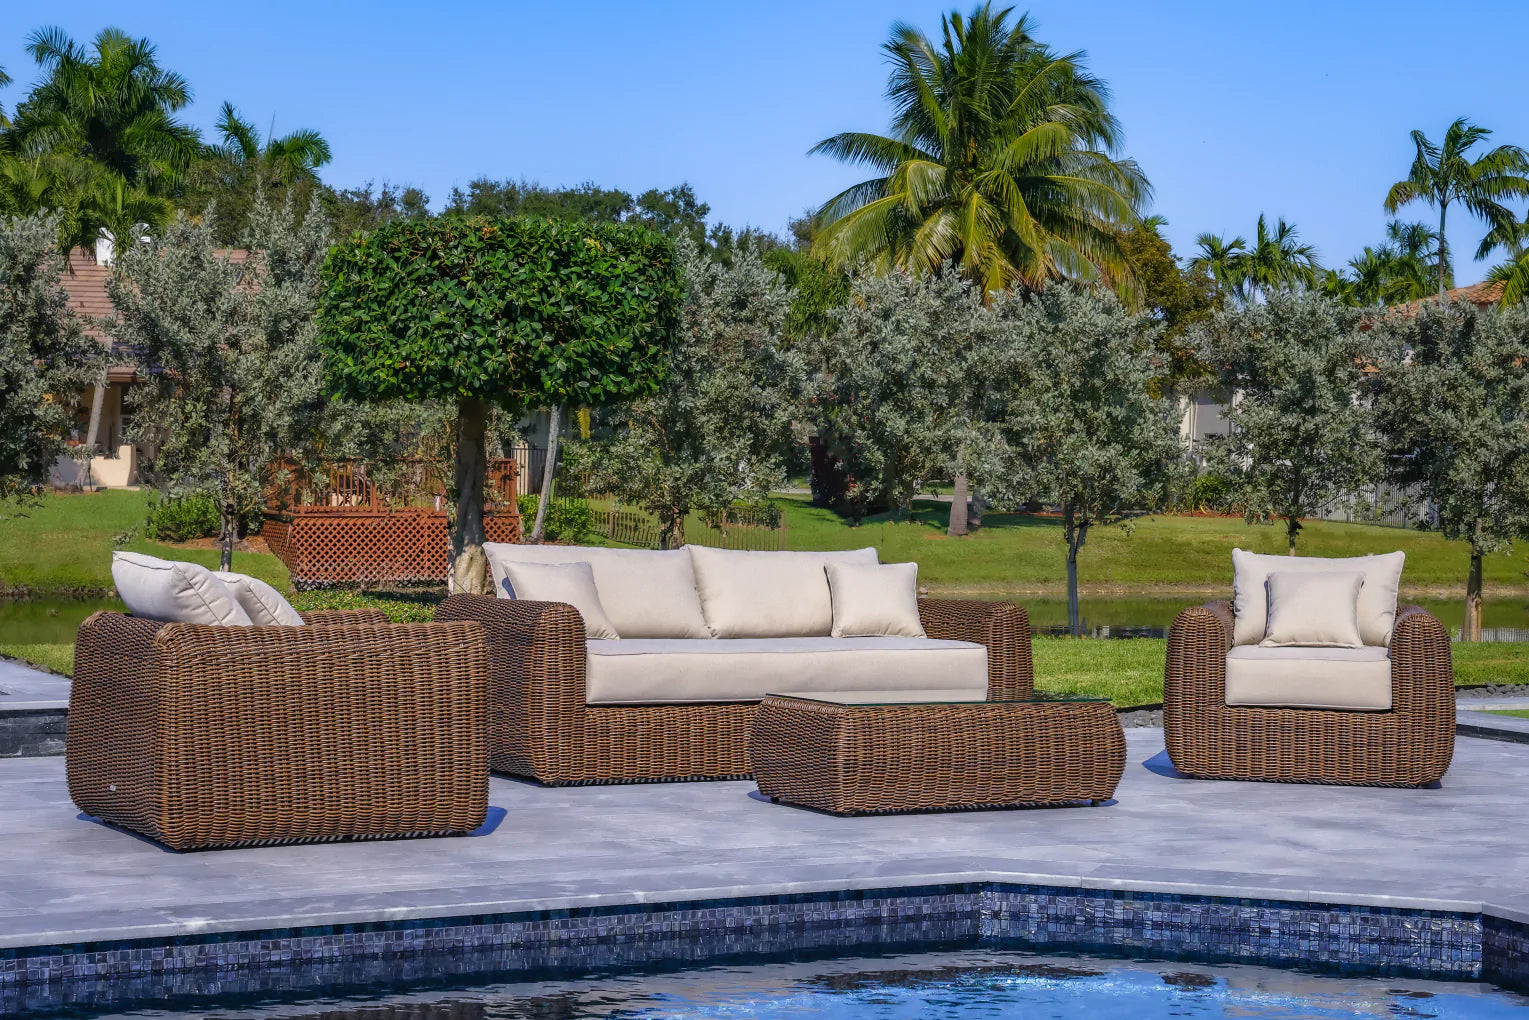 OUTSY - Milo Lux 4-Piece Outdoor and Backyard Extra Deep Seating Wicker Aluminum Frame Furniture Set with Wicker Coffee Table in Brown - 0AMI-R02-BR-R-LUX